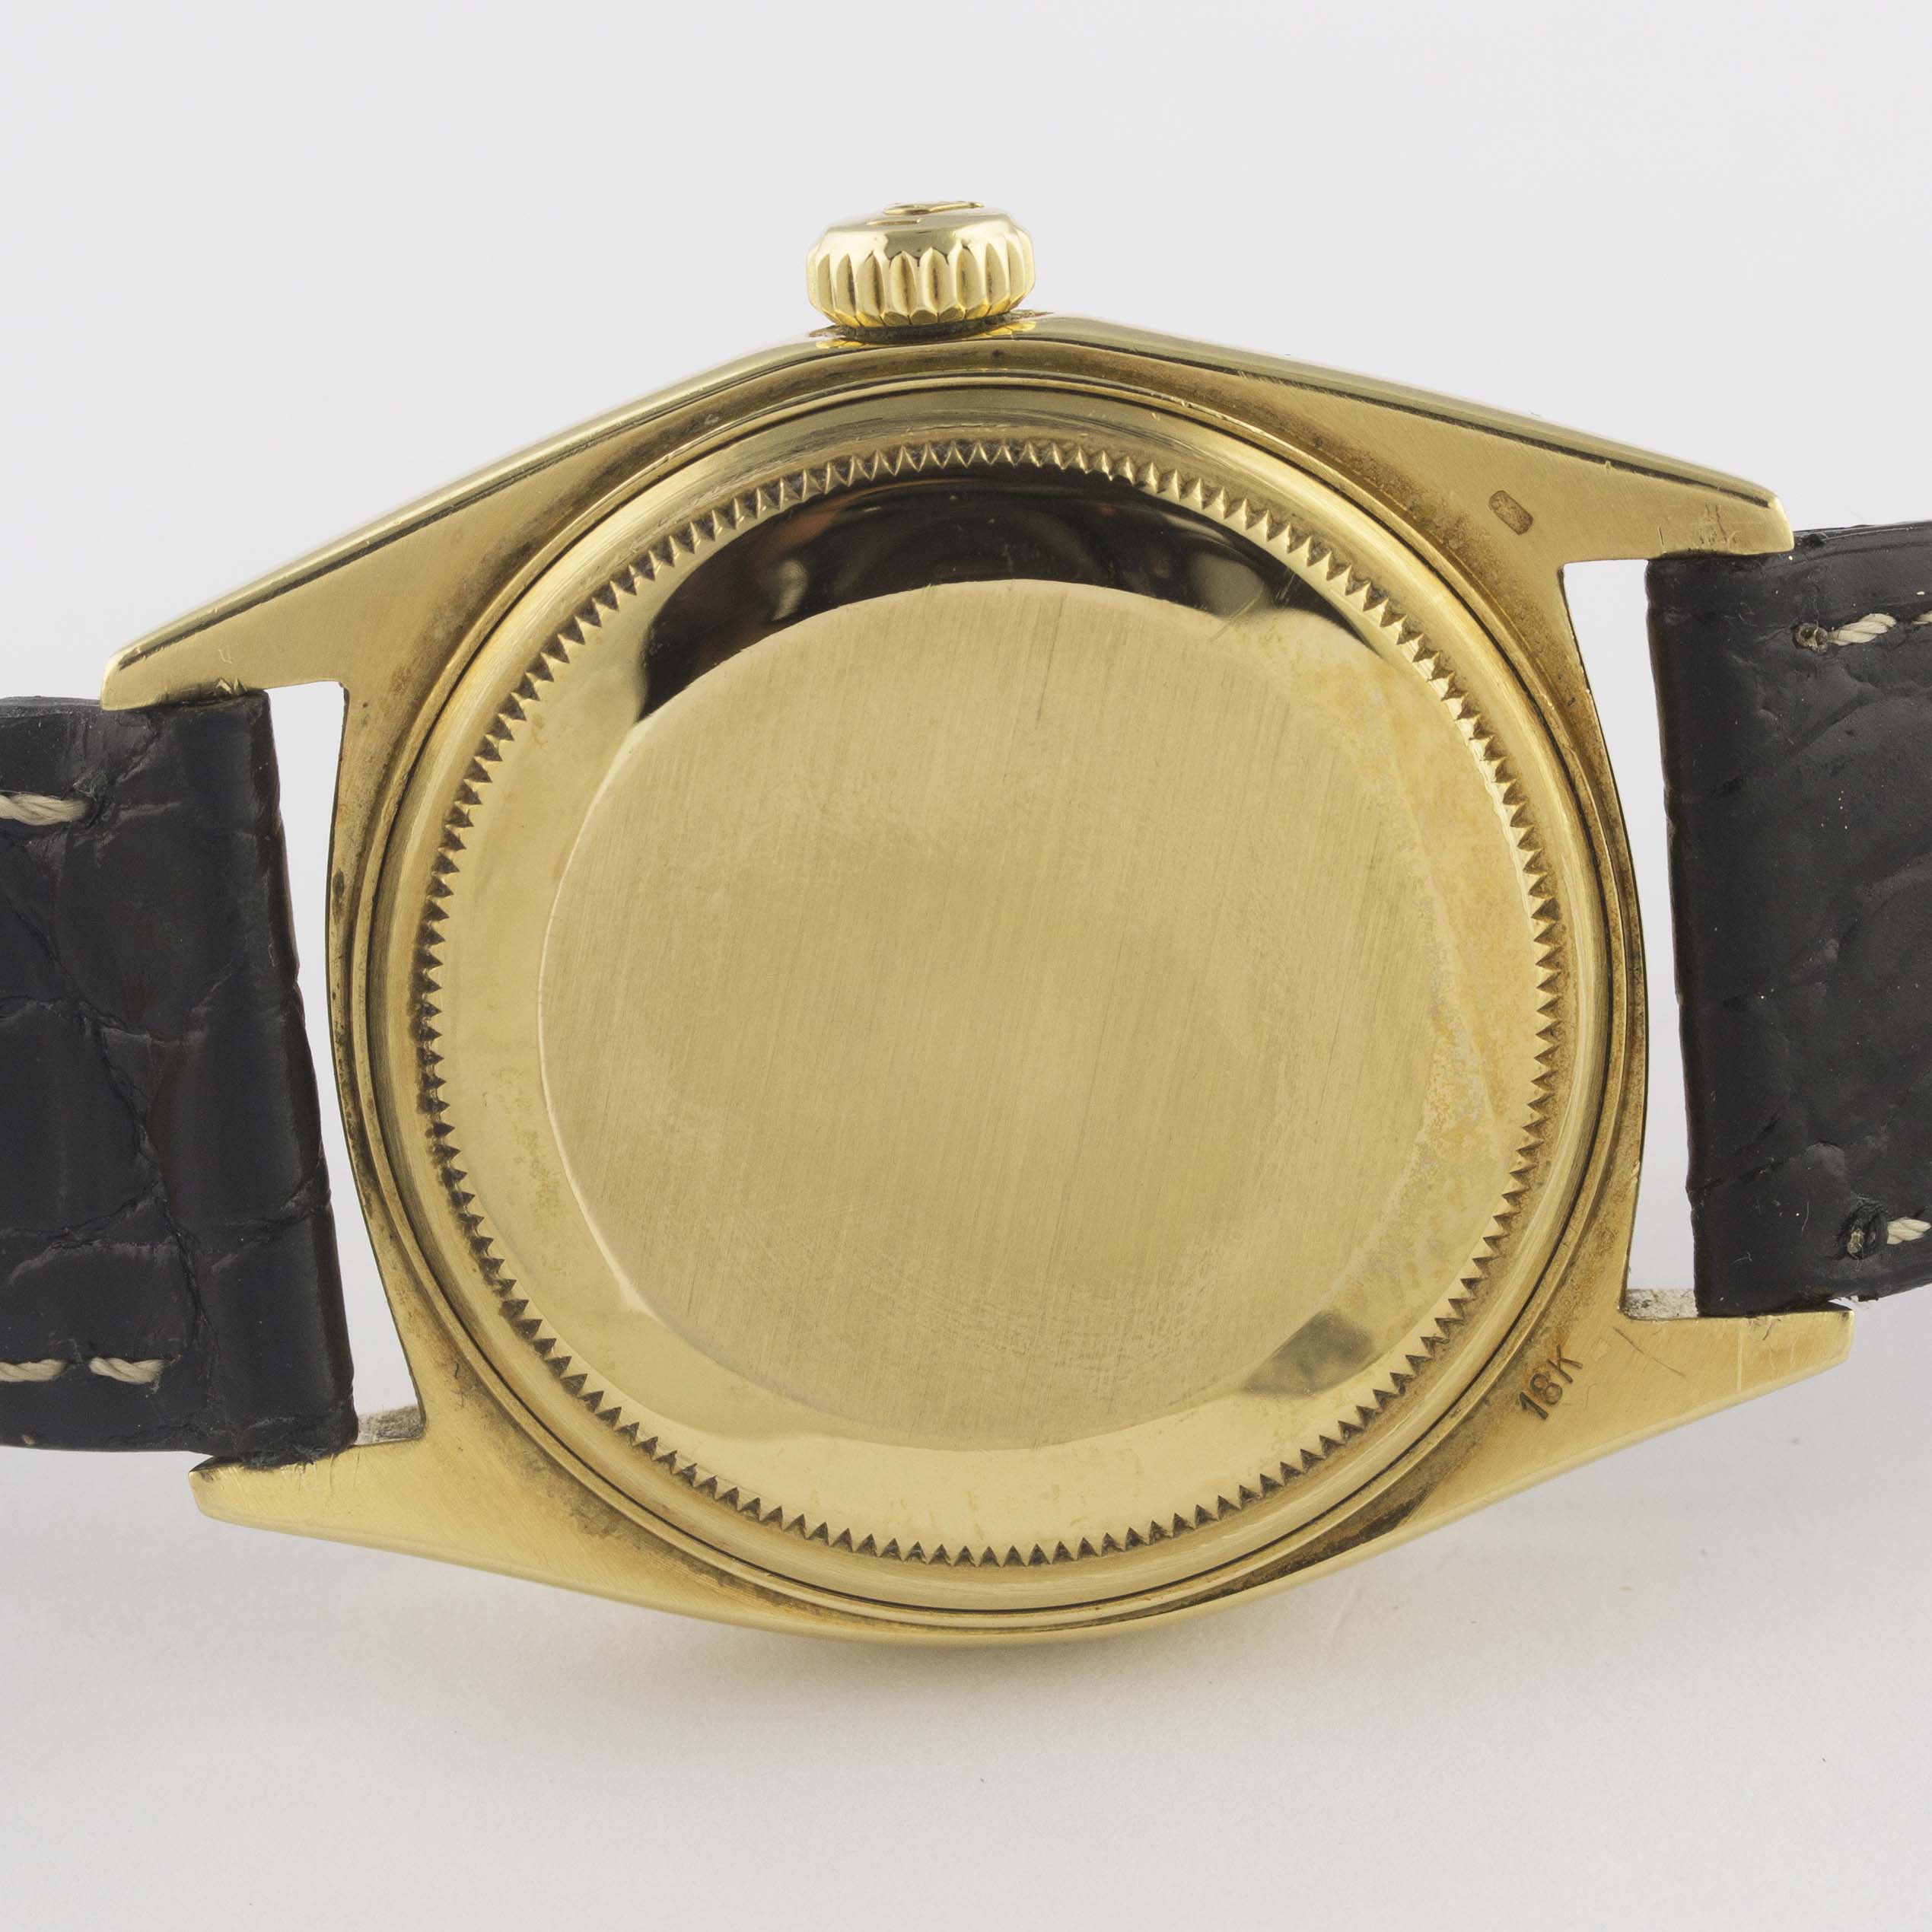 A RARE GENTLEMAN'S 18K SOLID GOLD ROLEX OYSTER PERPETUAL DAY DATE WRIST WATCH CIRCA 1972, REF. - Image 7 of 11